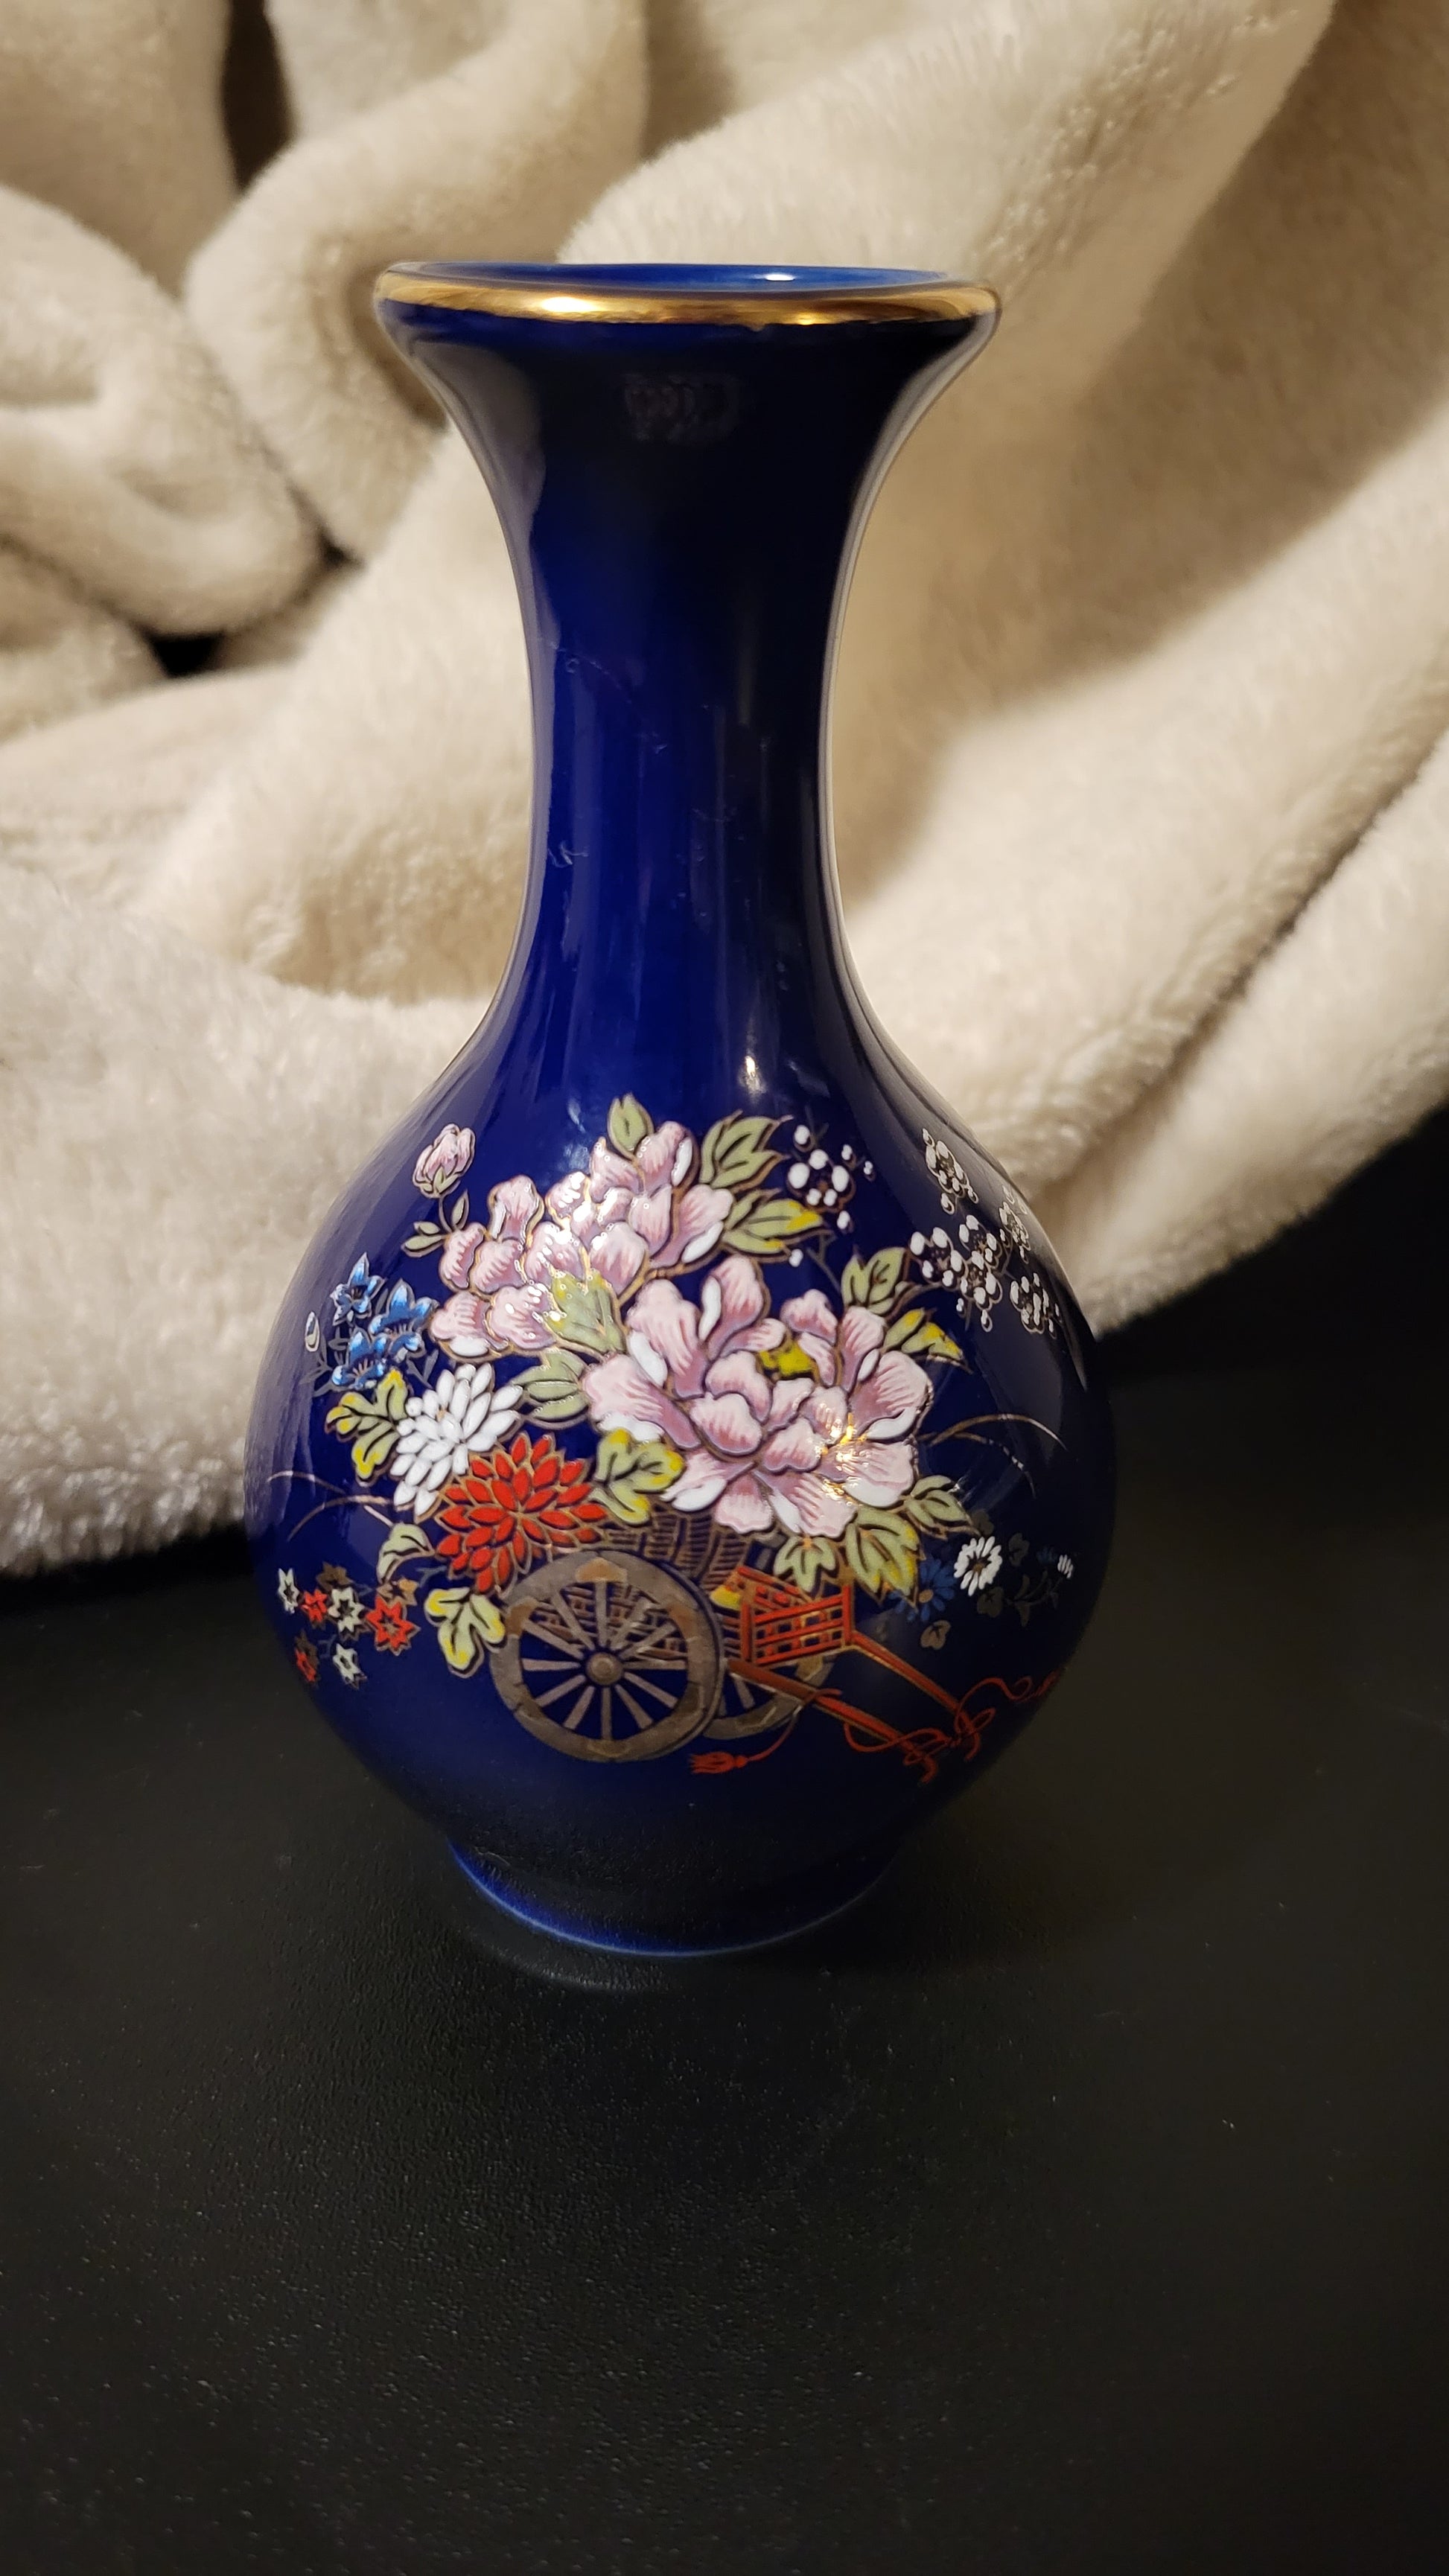 A small beautiful oriental vase, blue glass with painted flowers and a cart, with gold trim, front view.